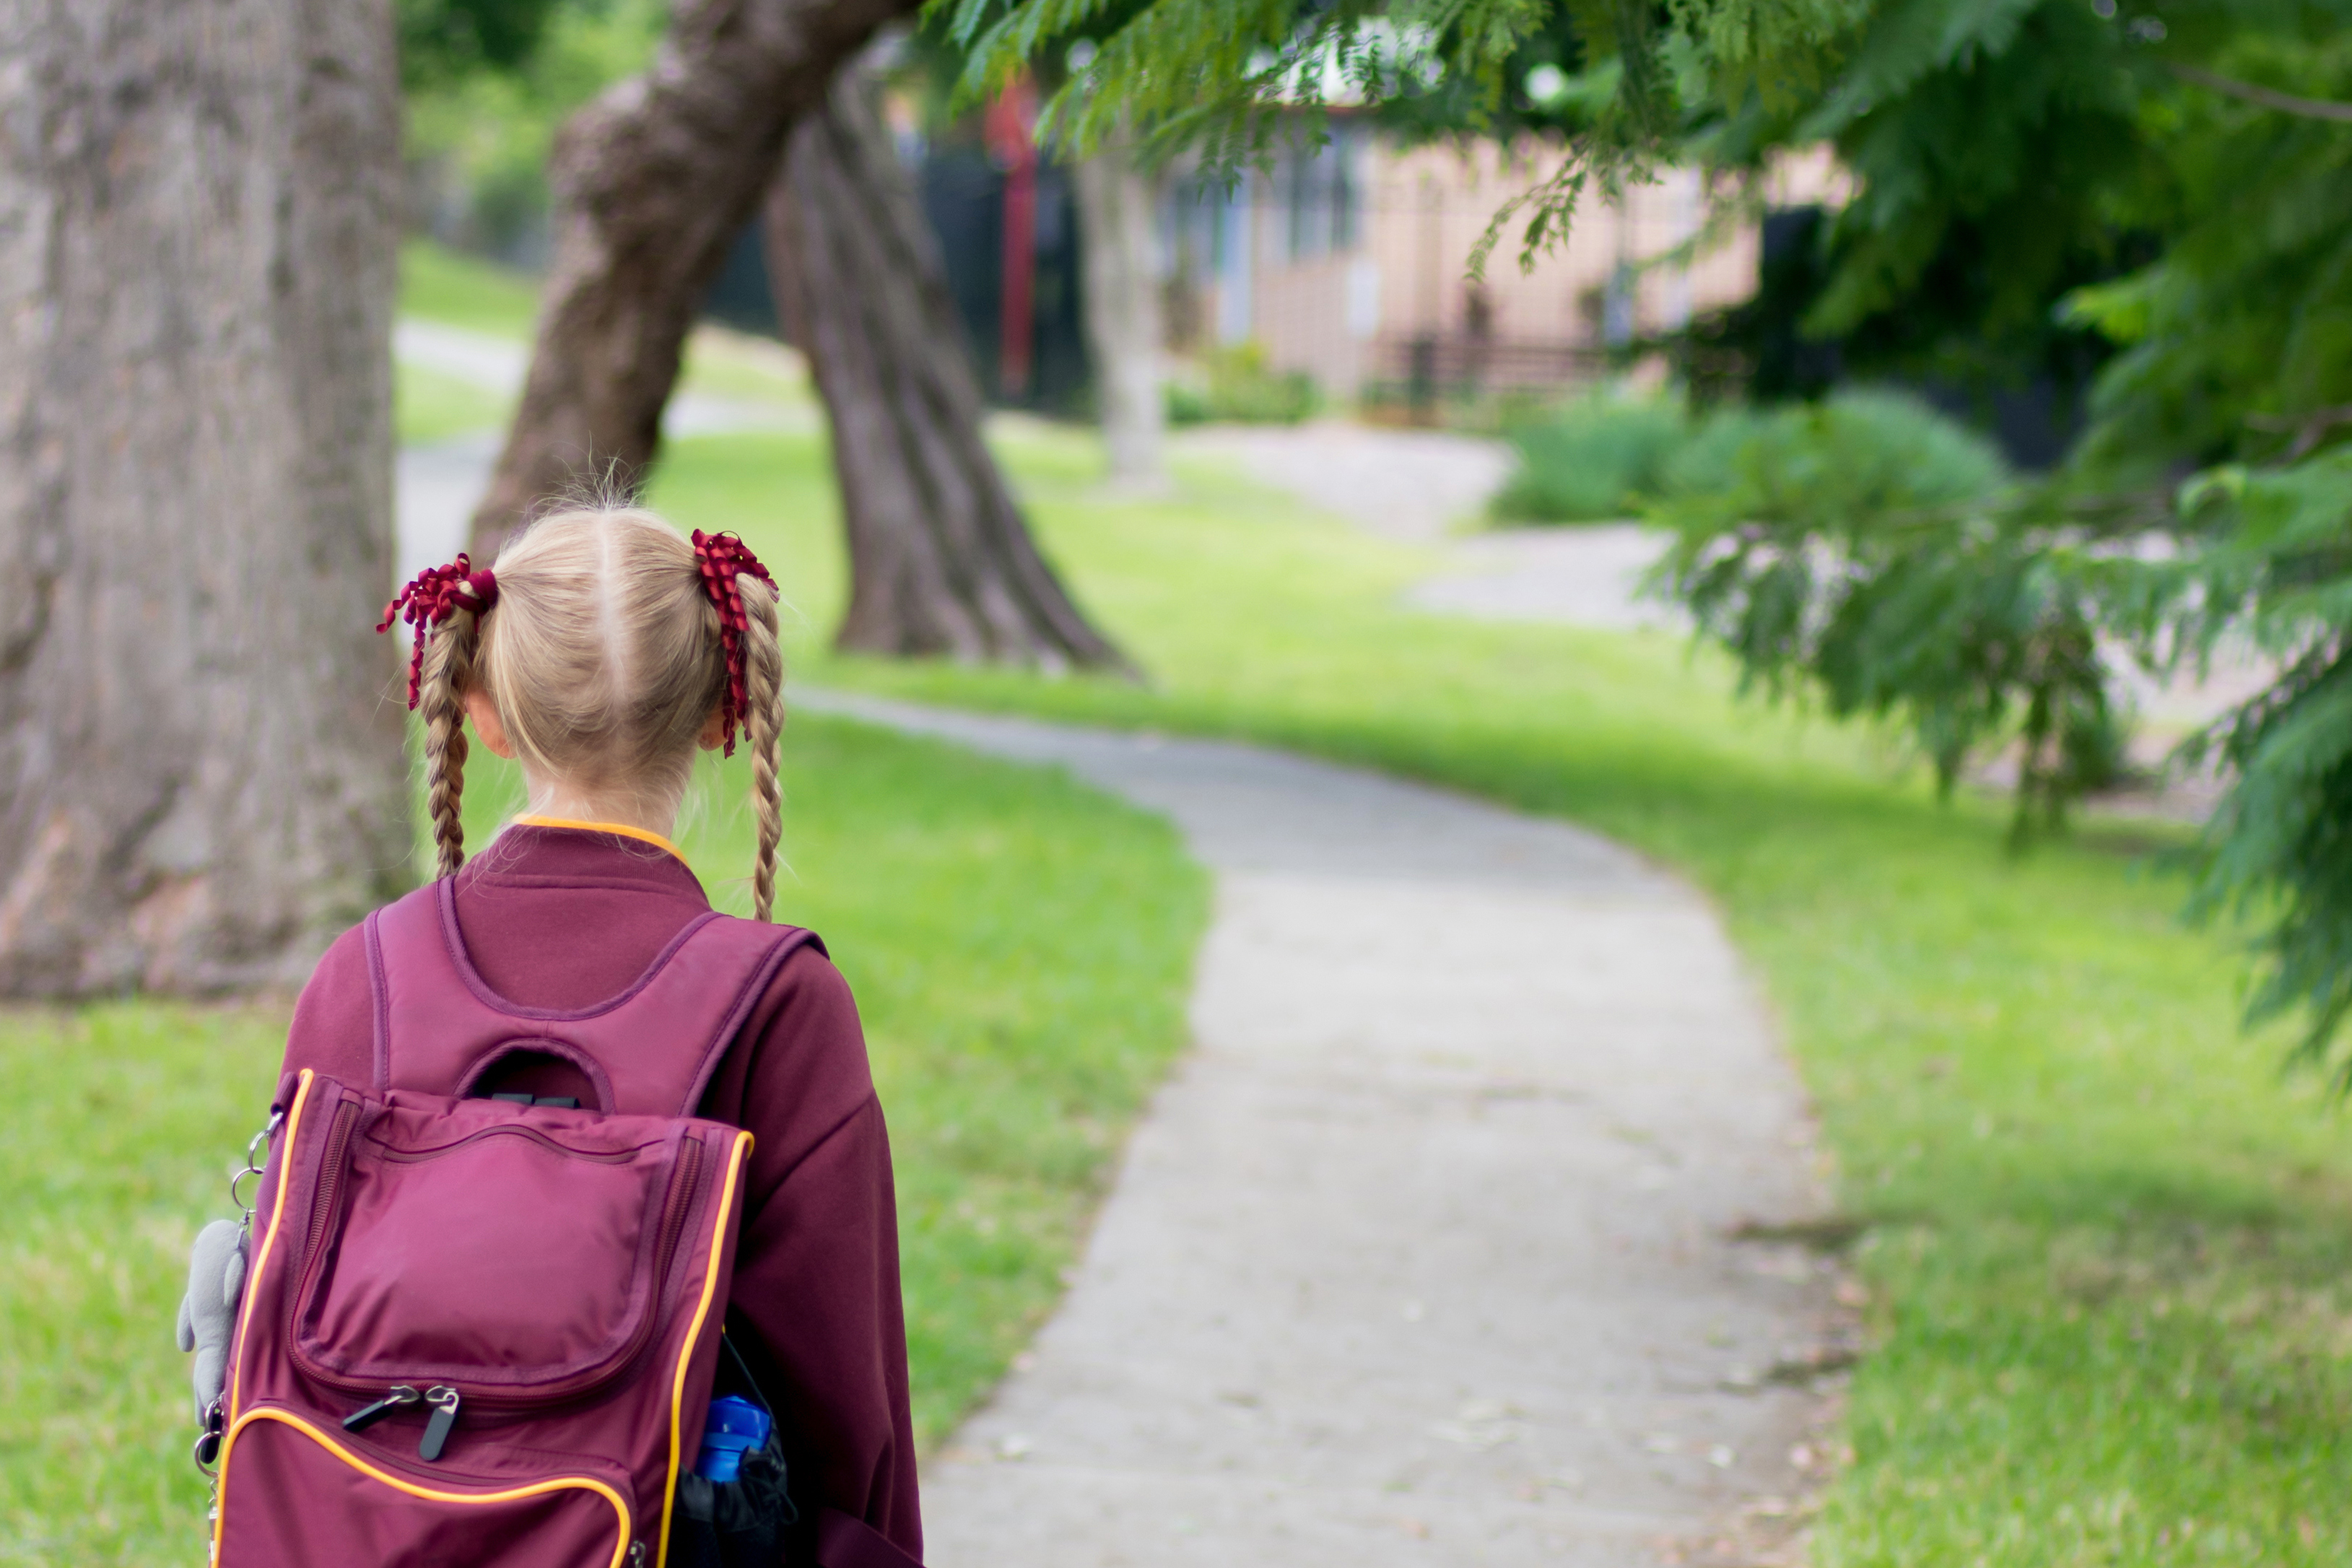 Girl in pigtails and school uniform with backpack walking home from school alone